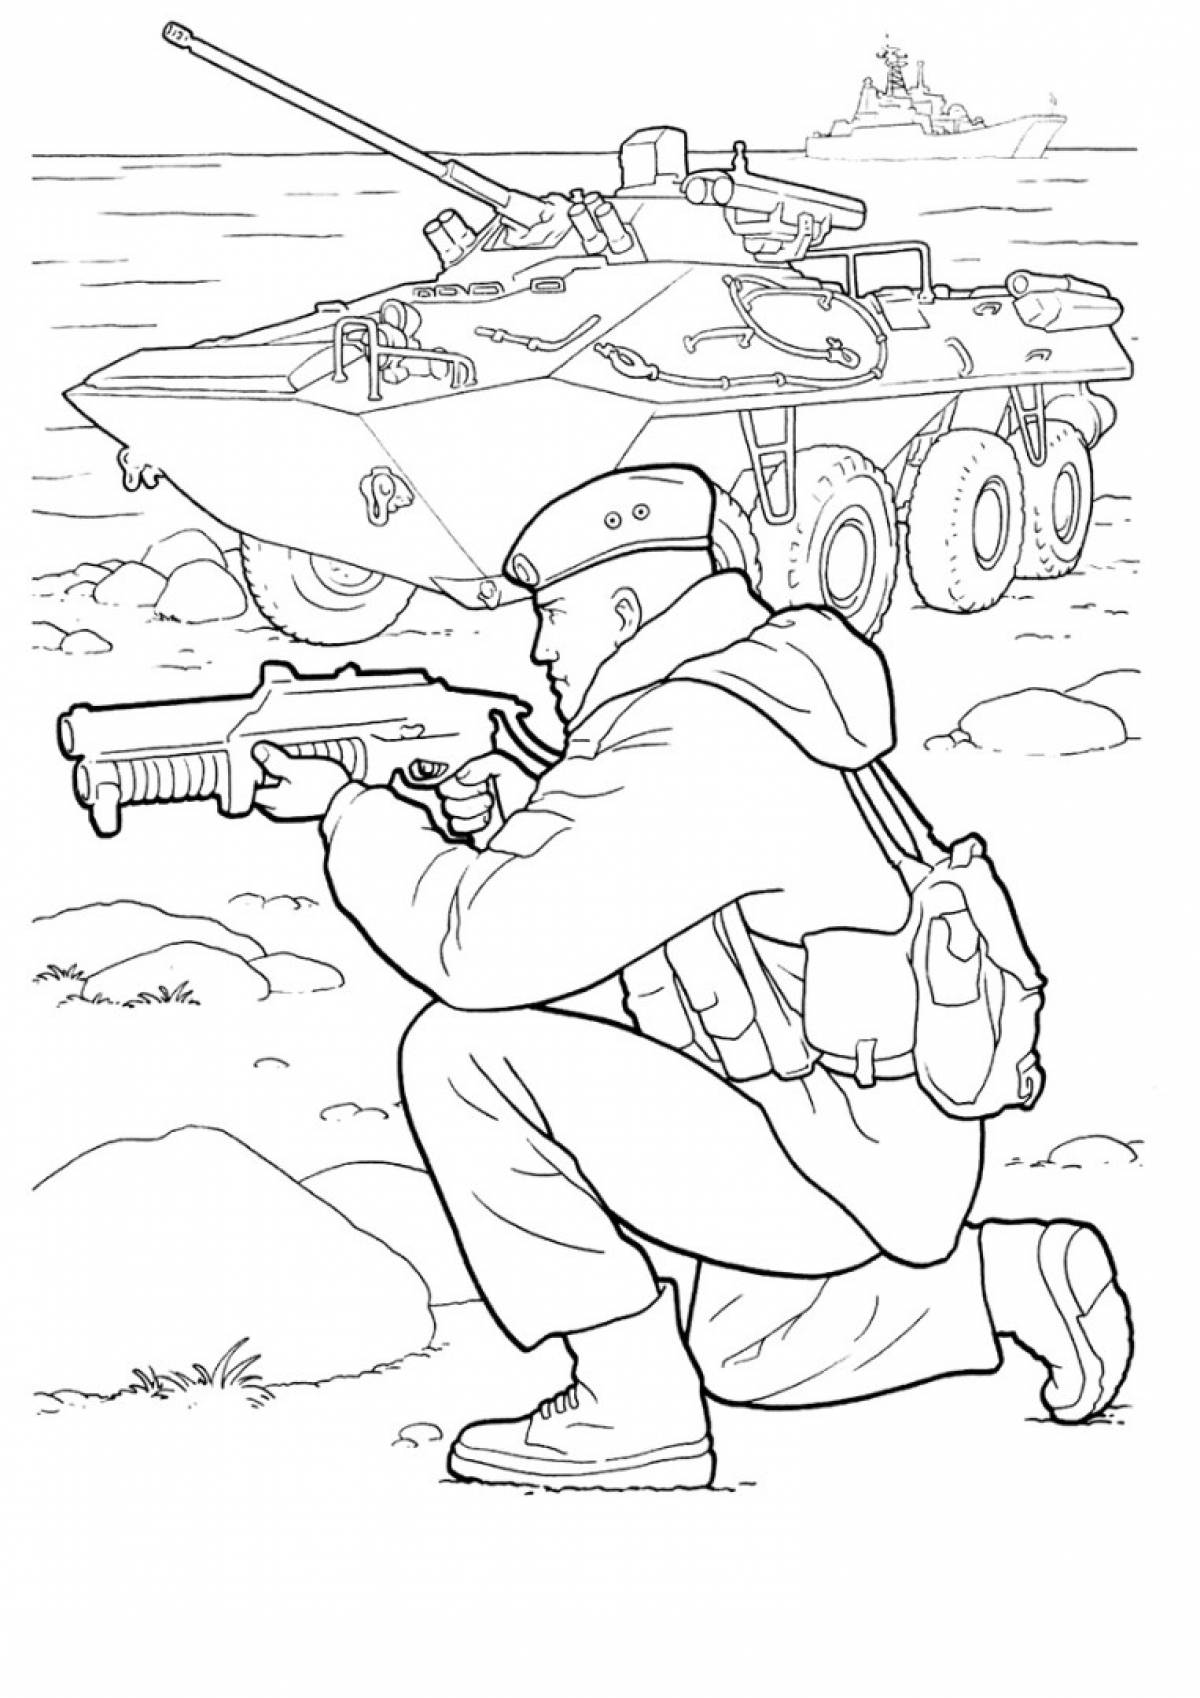 Gorgeous military tank badge coloring page